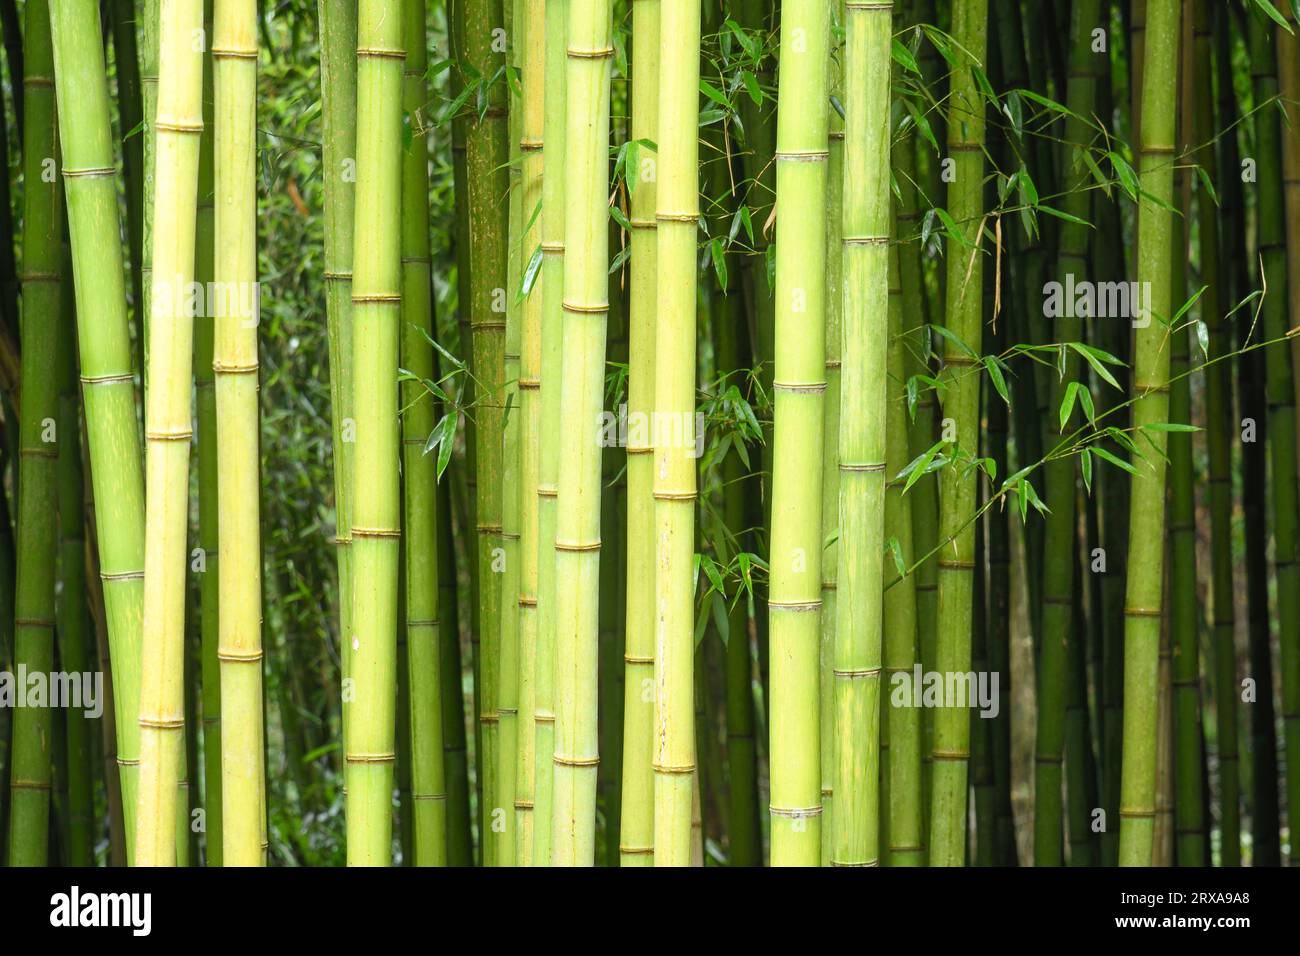 CLOSE UP OF BAMBOO TRUNKS Stock Photo